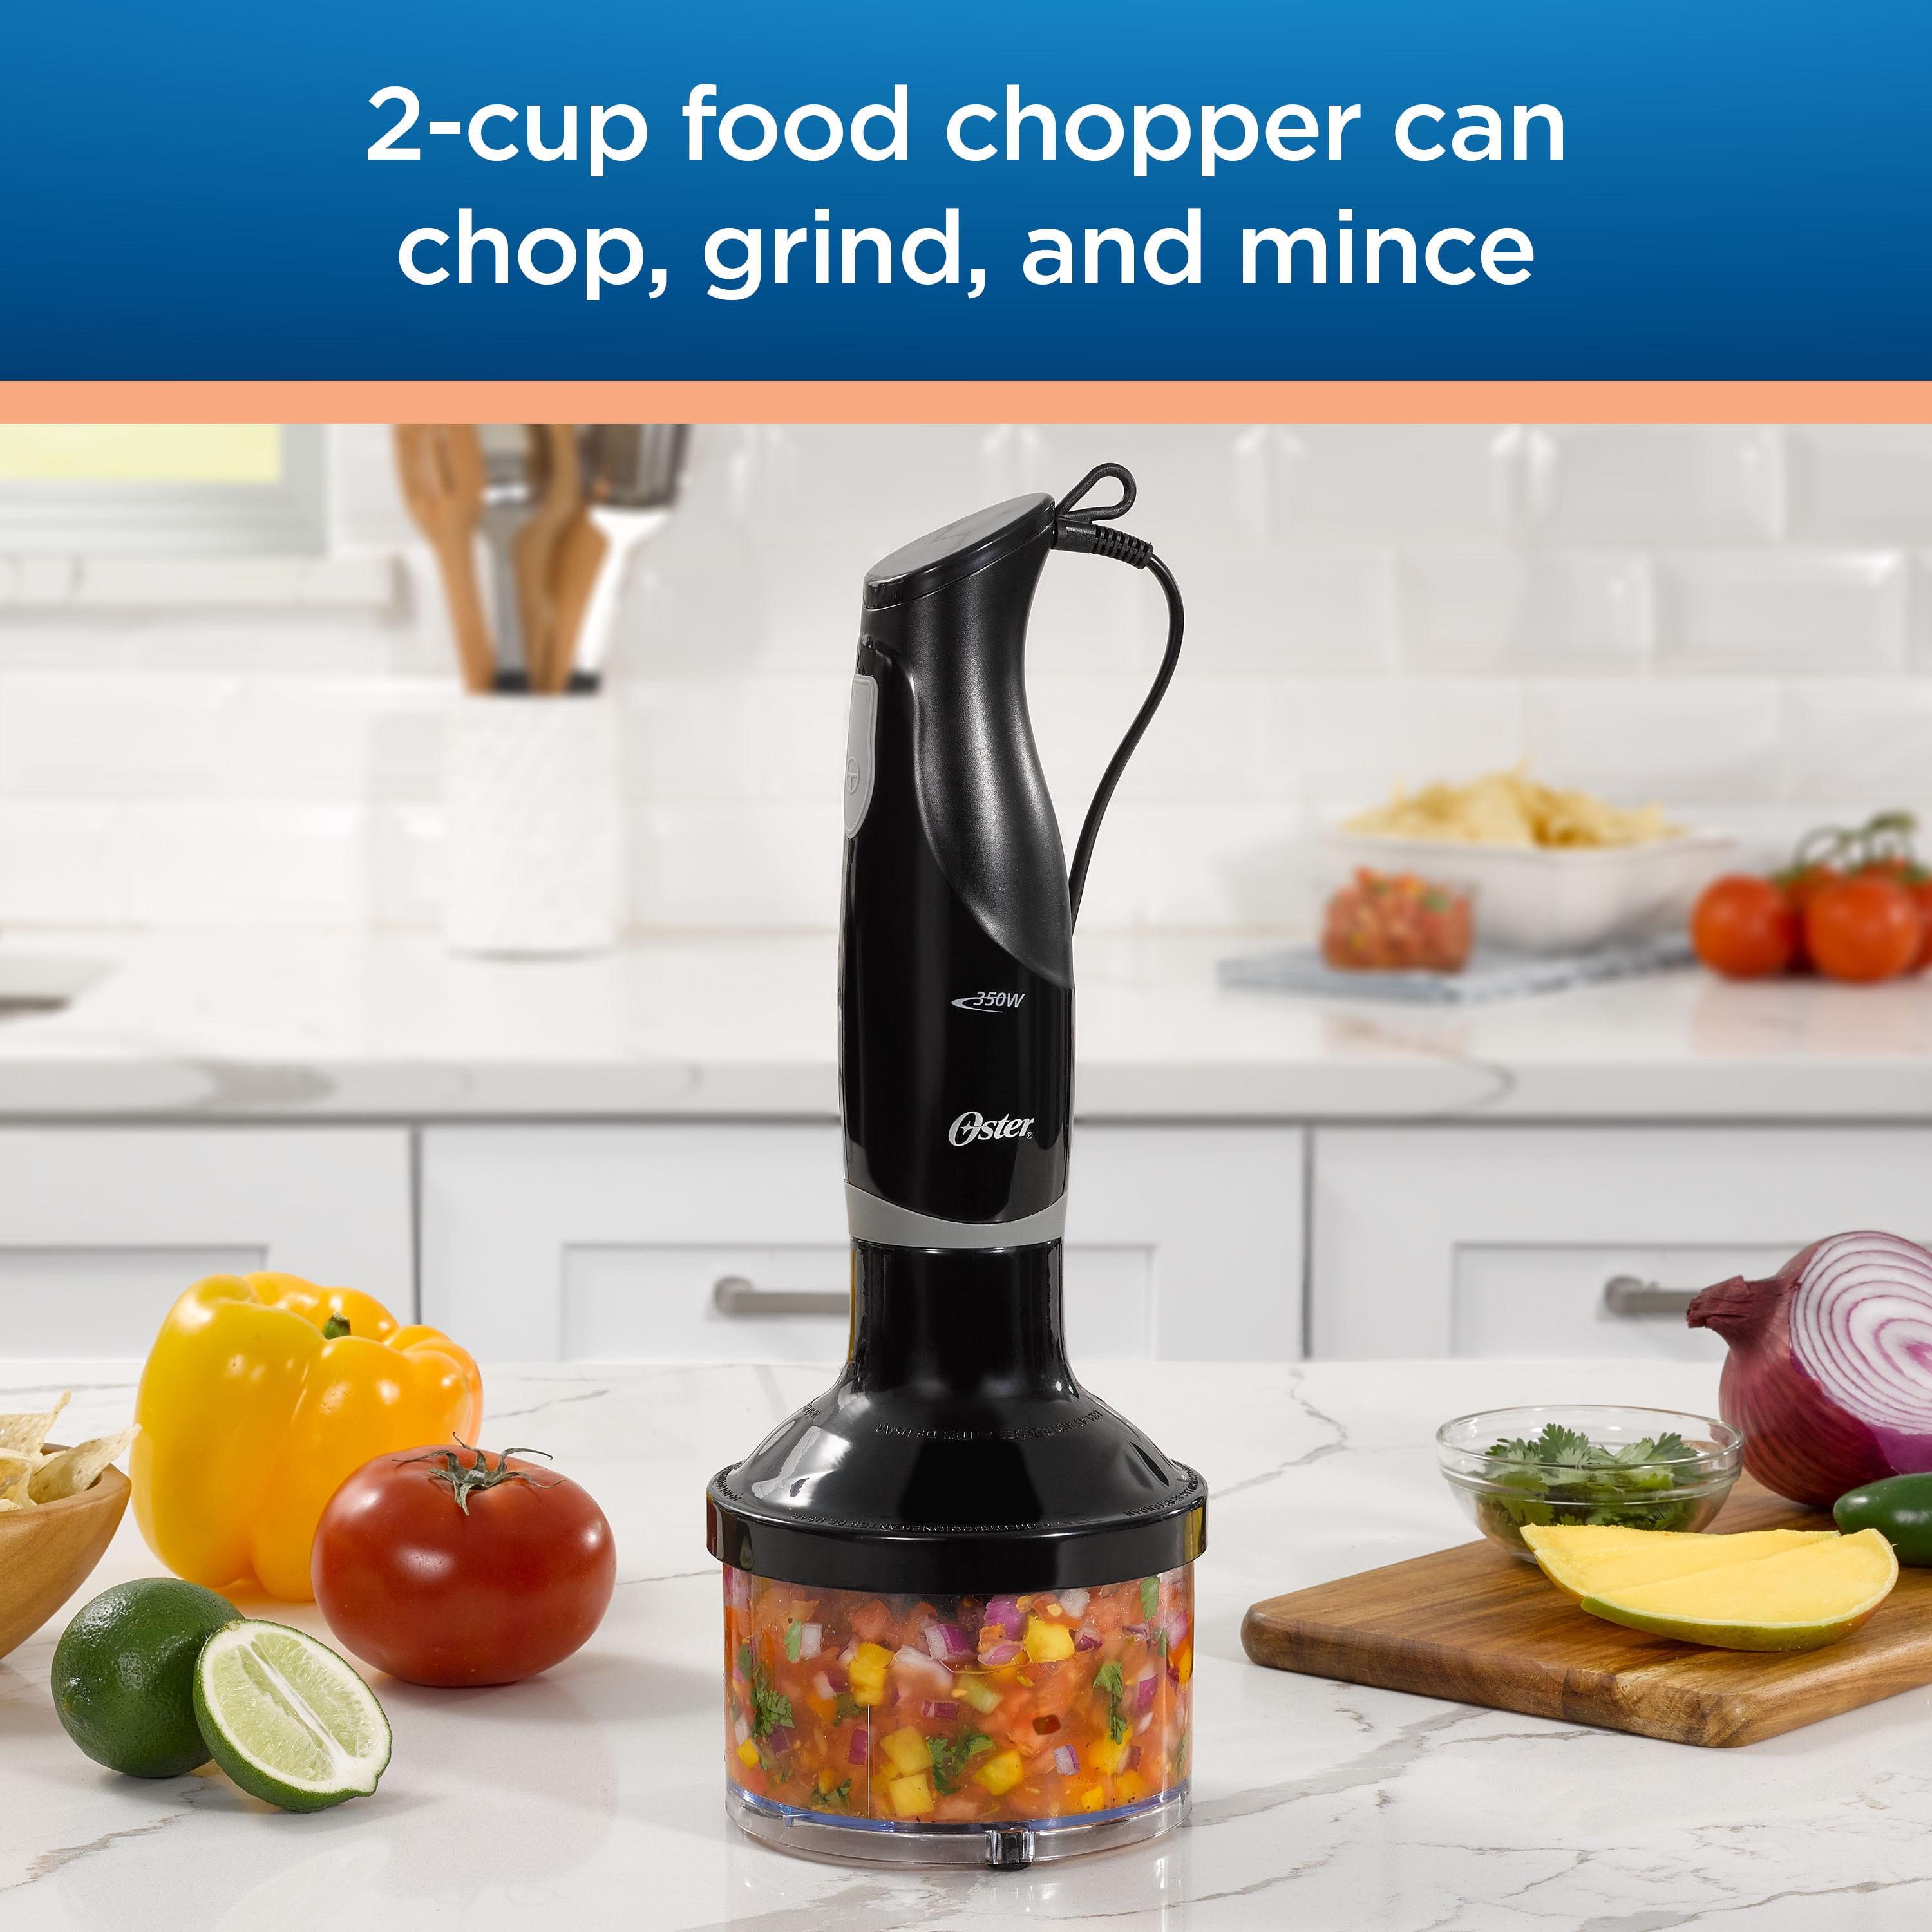 Oster Food Prep Kit with Immersion Blender, Electric Knife, and 2-Cup Capacity Mini Food Chopper, 350W - 1